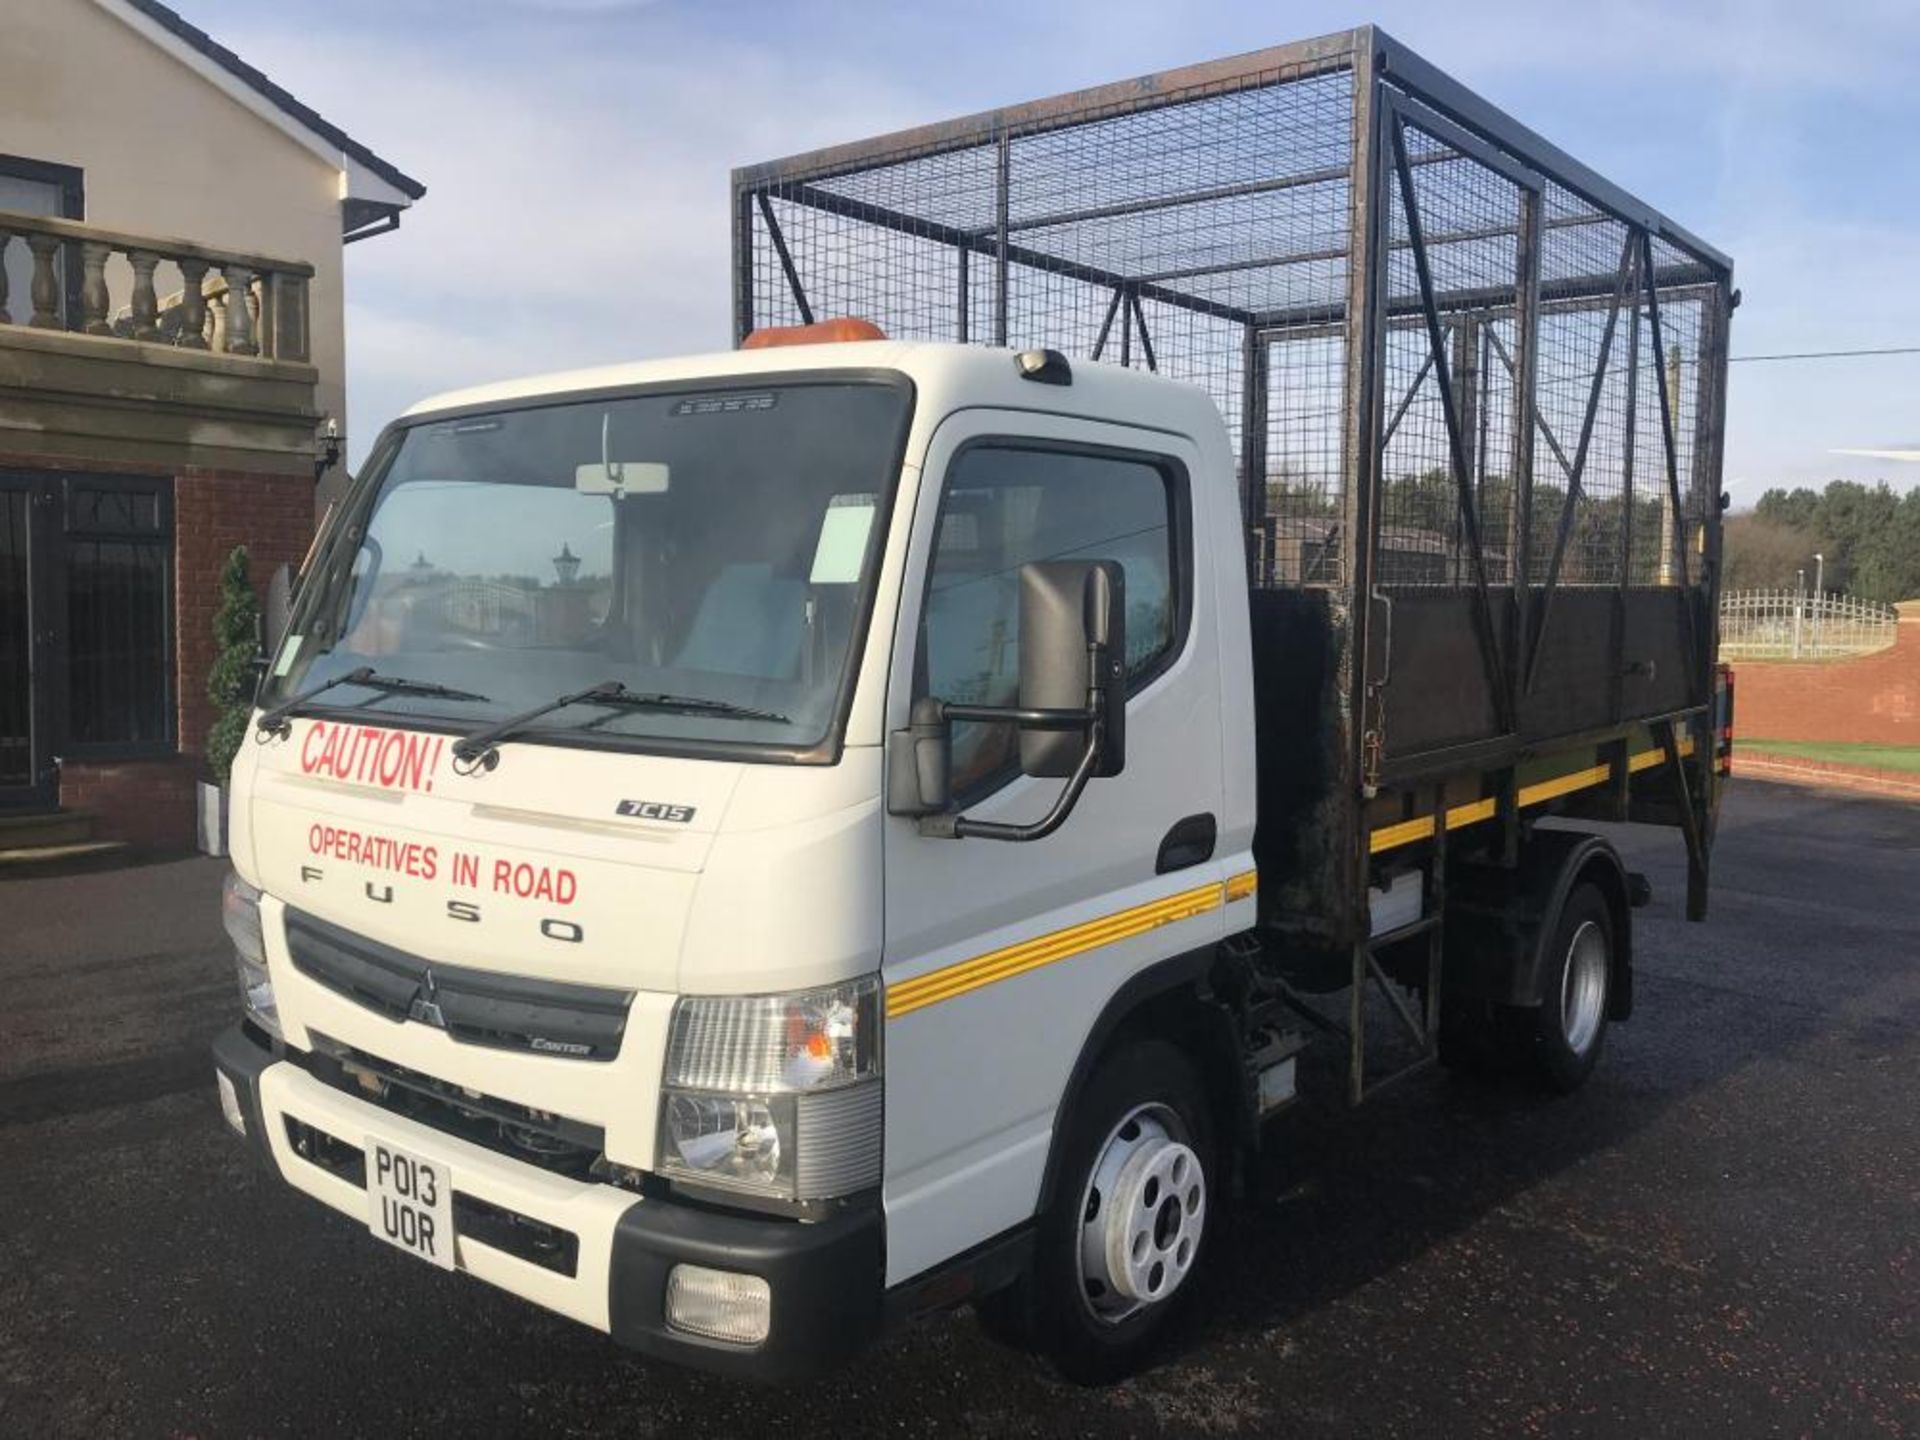 2013/13 REG MITSUBISHI FUSO CANTER 7C15 28 WHITE DIESEL CAGED TIPPER TRUCK, SHOWING 0 FORMER KEEPERS - Image 2 of 16